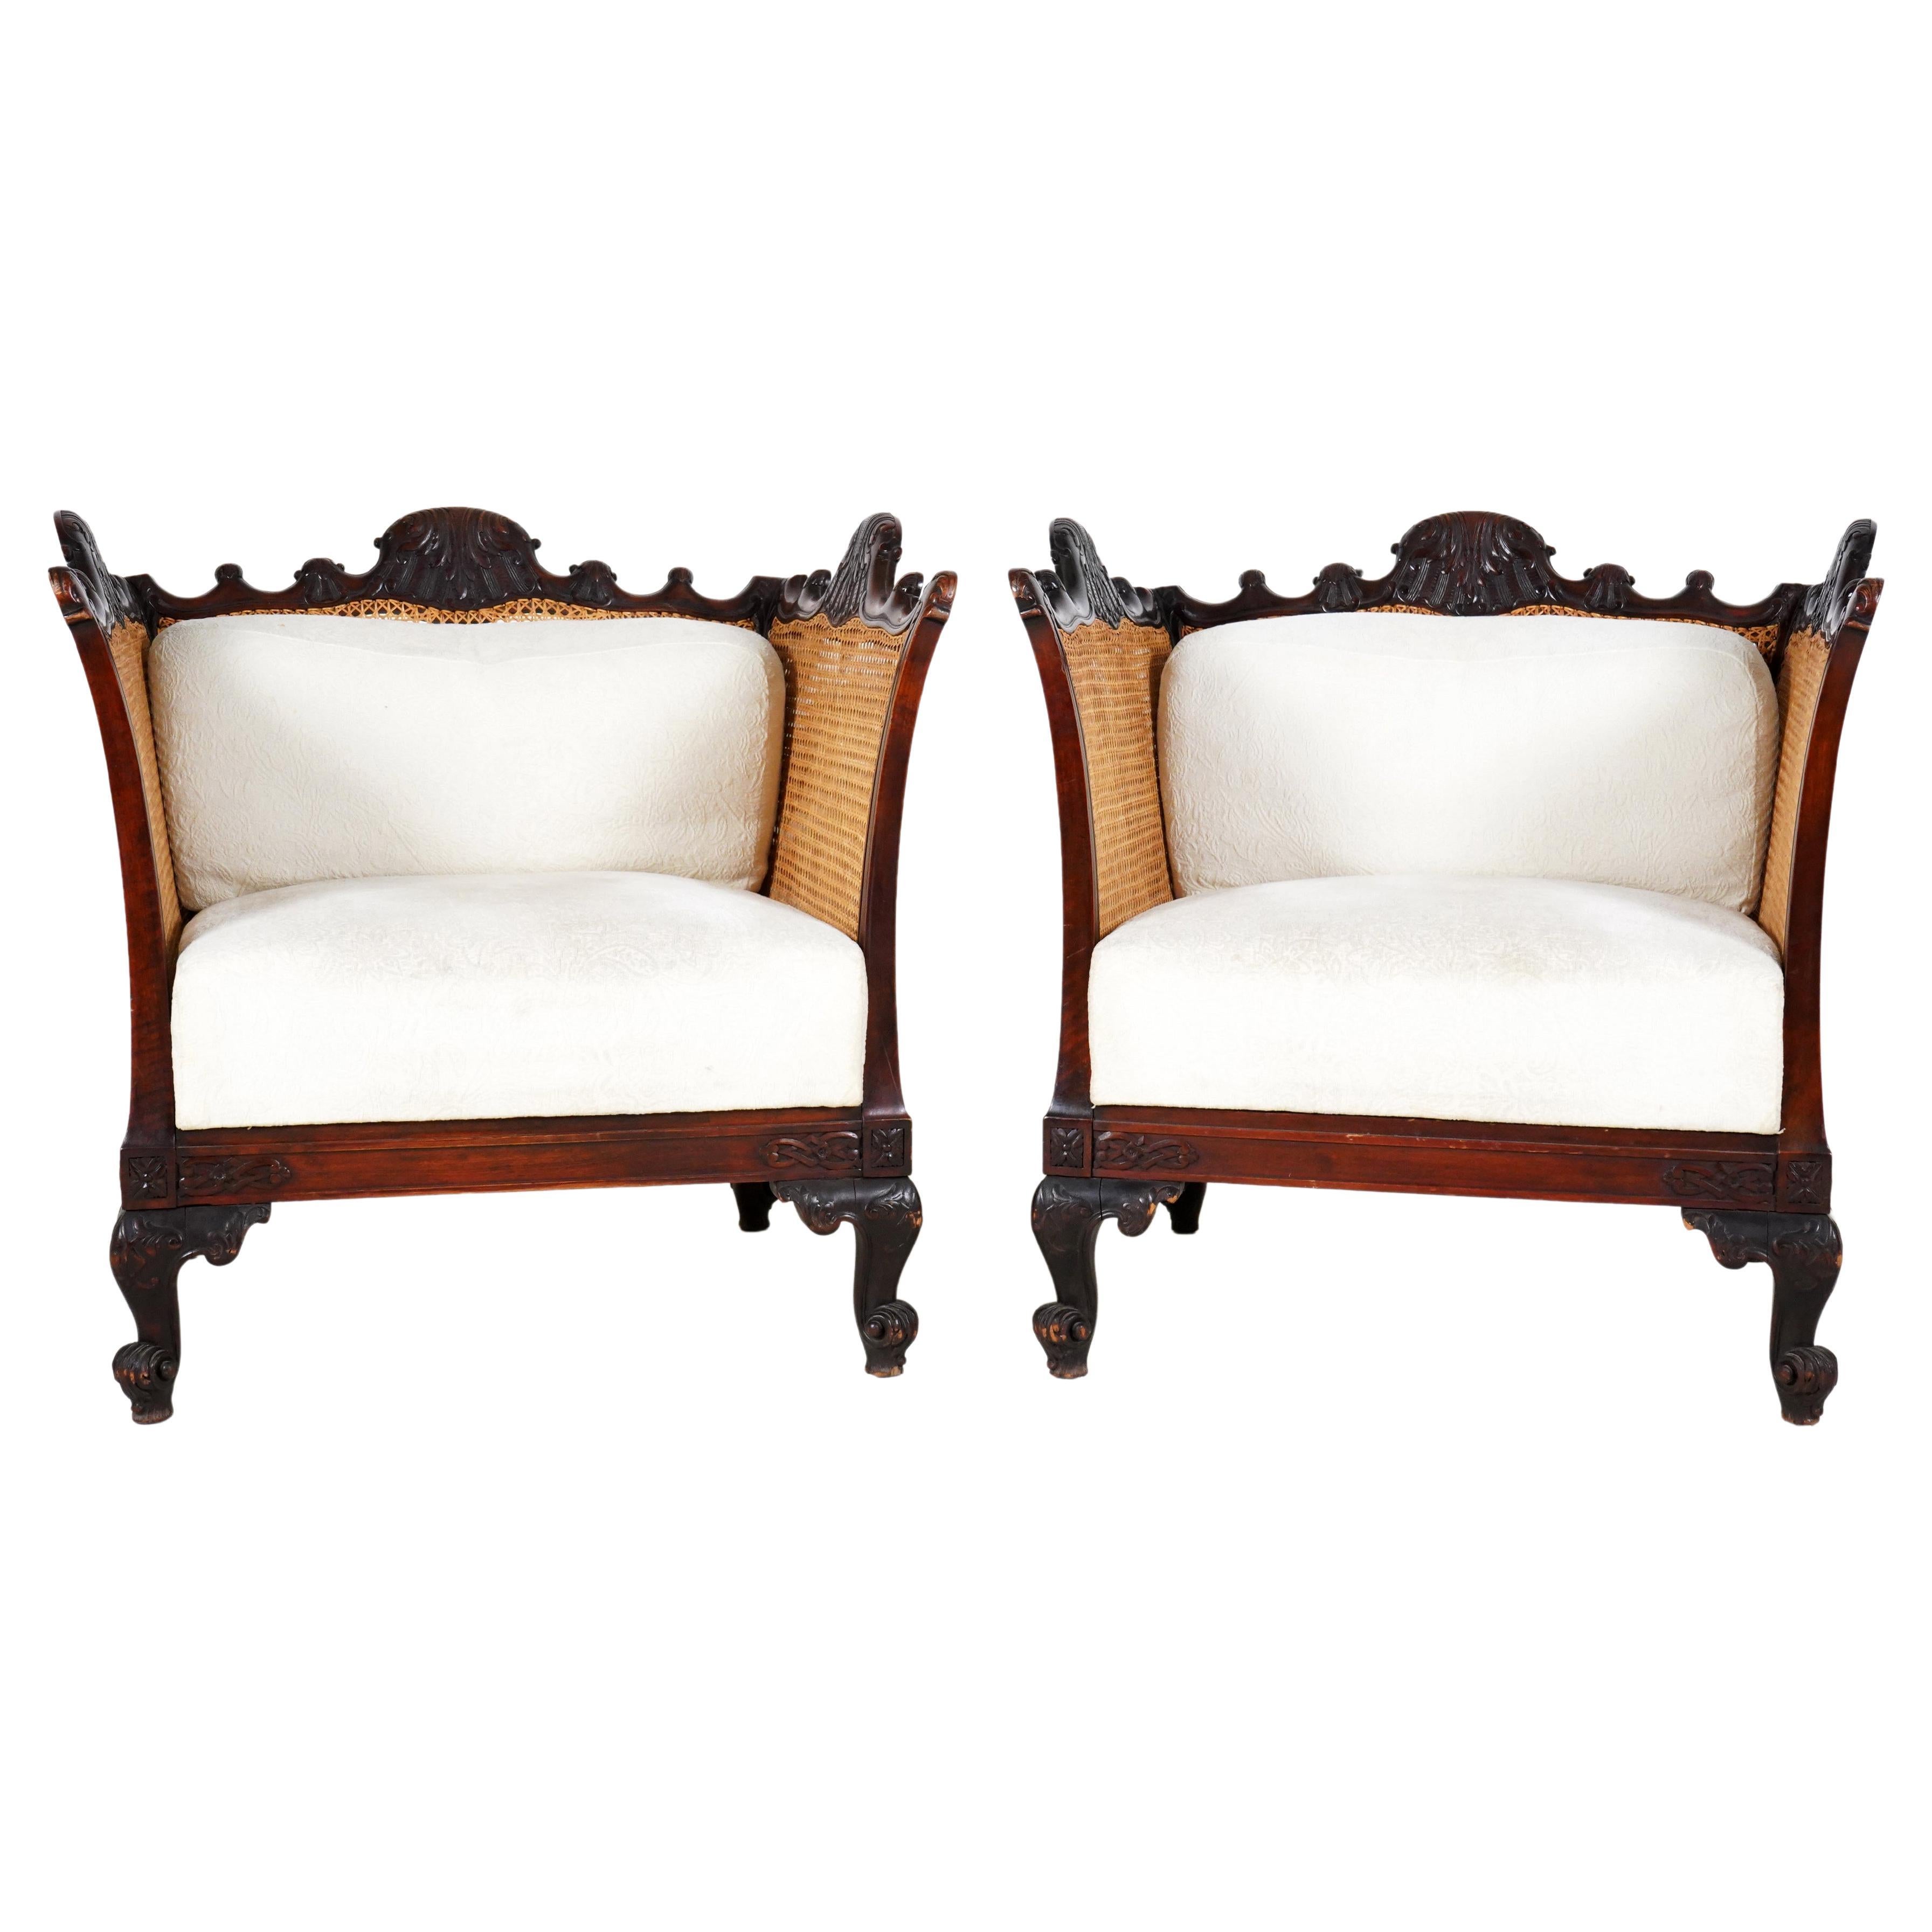 Pair of Vintage Baroque Revival Armchairs with Cane Sides